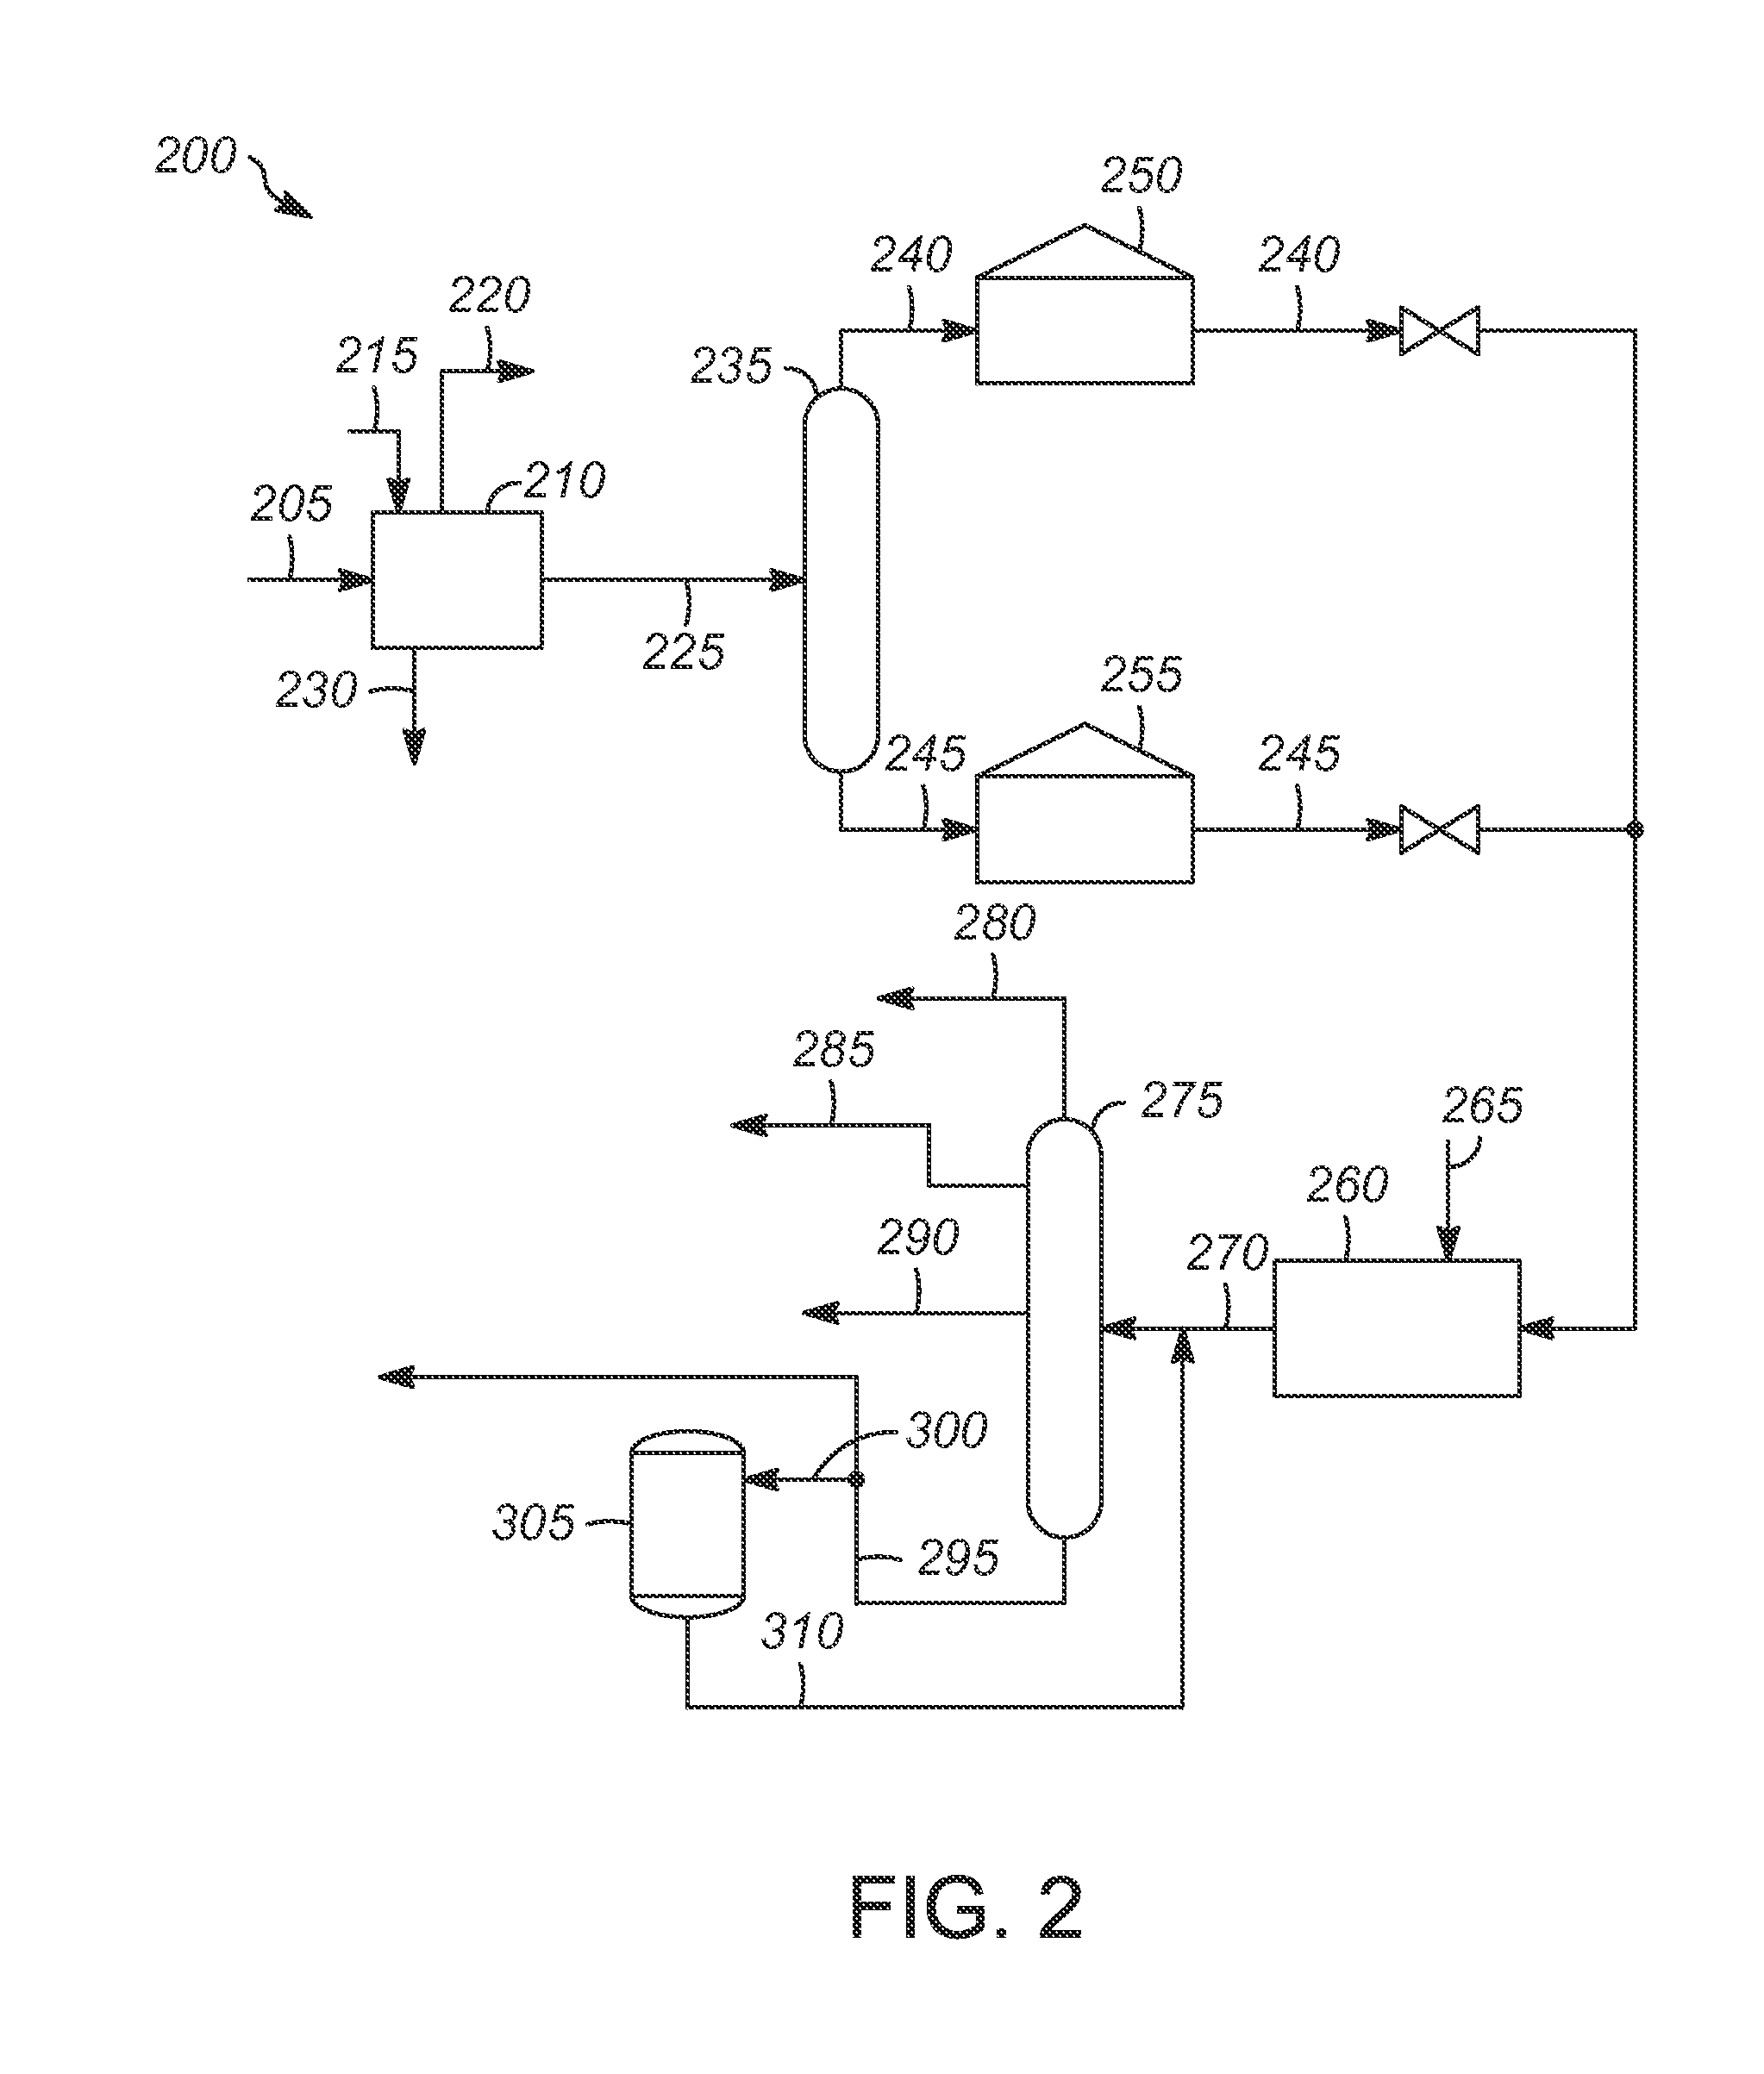 Process for producing diesel fuel and aviation fuel from renewable feedstocks having improving yields